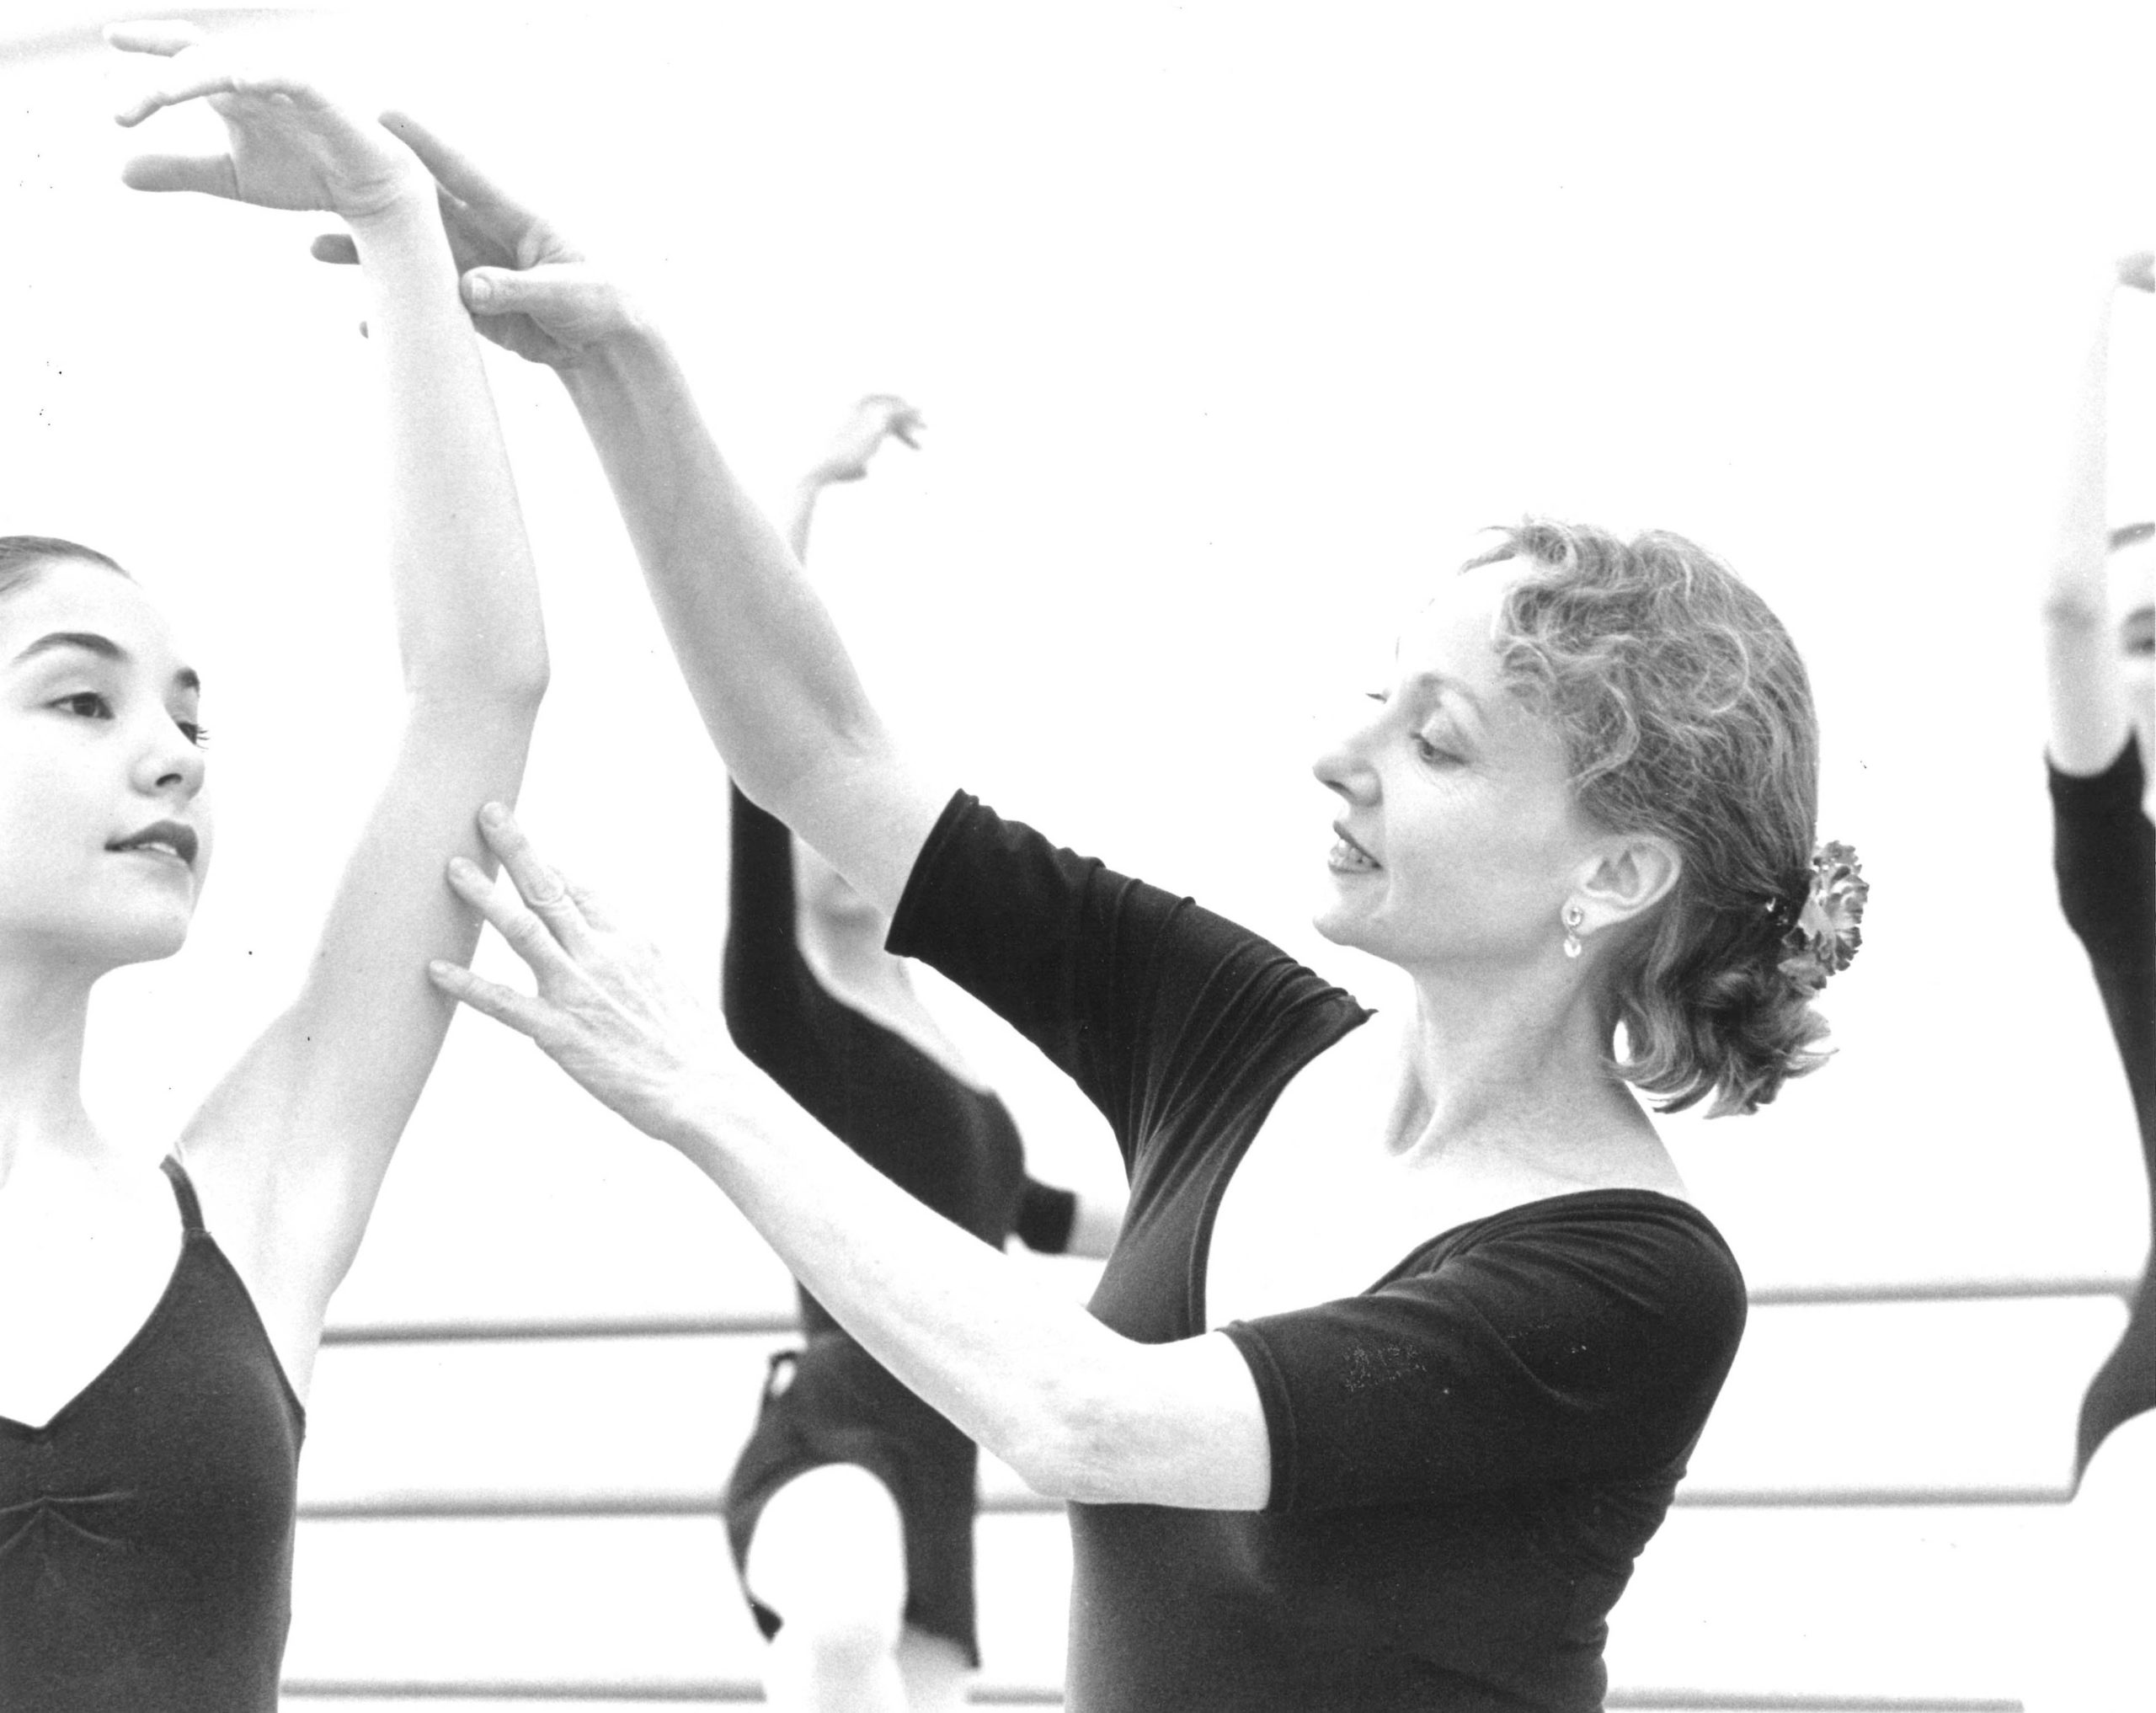 In a black and white image, Suki Schorer is seen in profile, both arms elegantly raised as she adjusts a student's arms in high fifth.